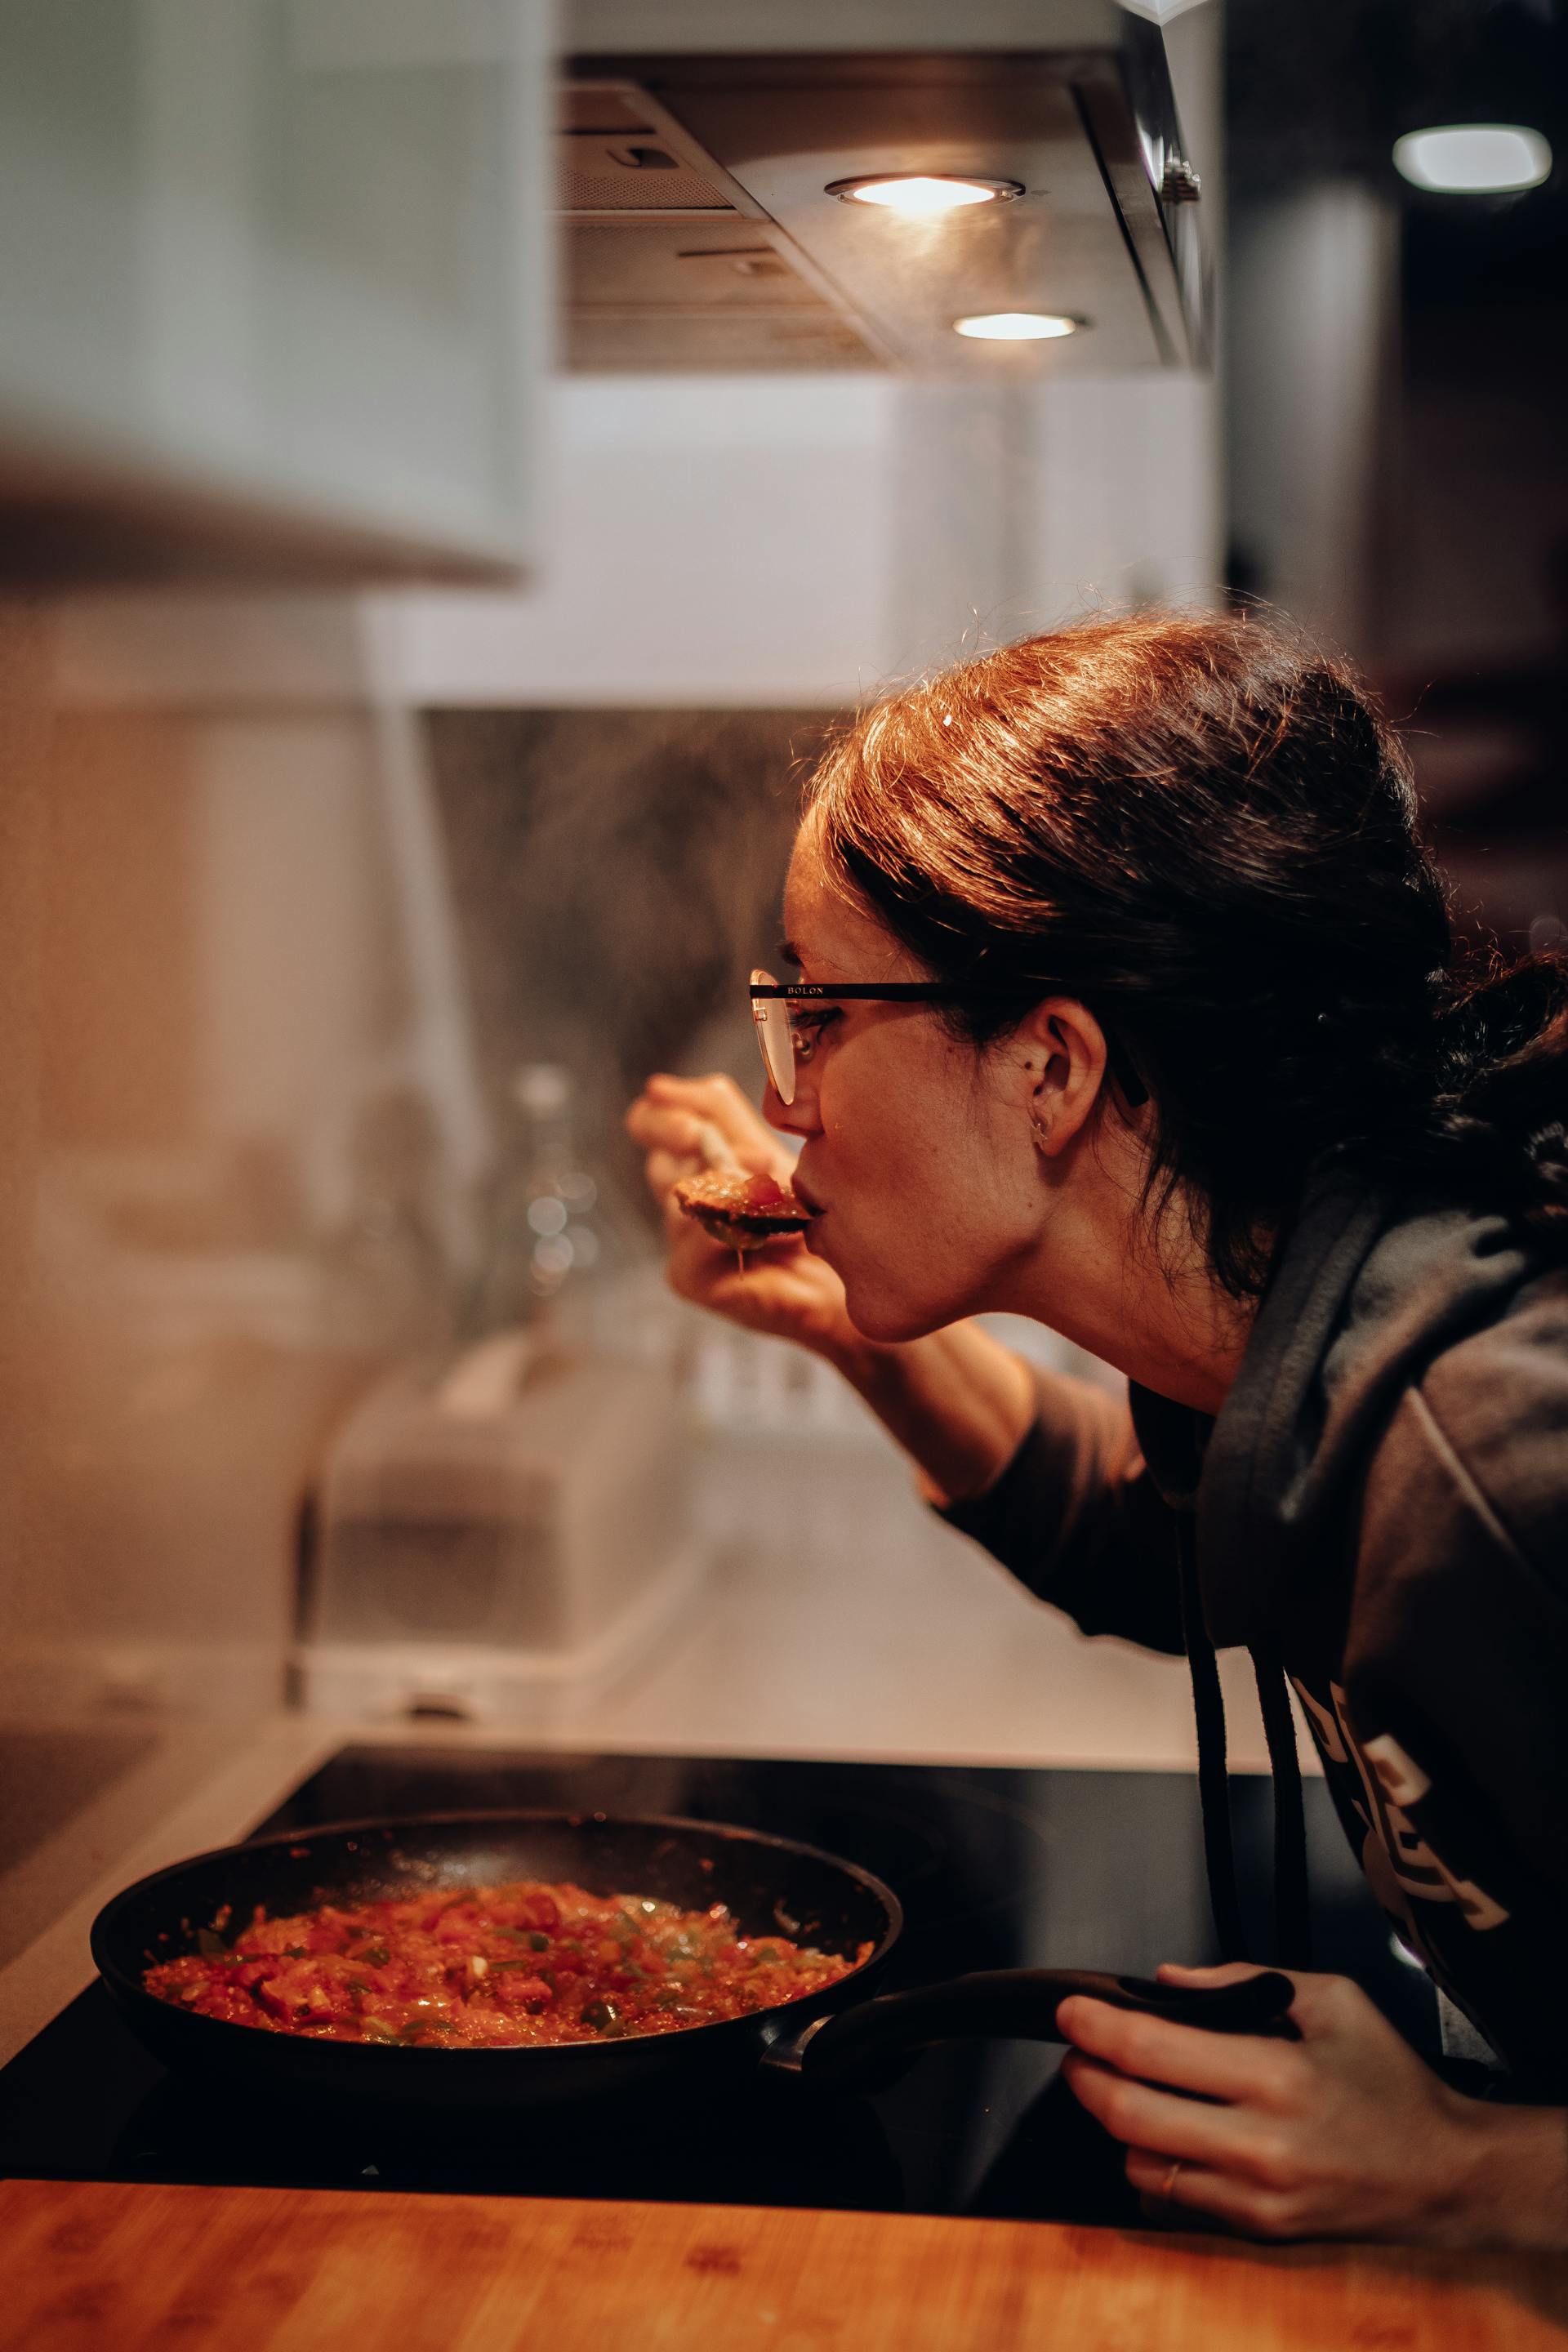 A woman tasting from a pan | Source: Pexels